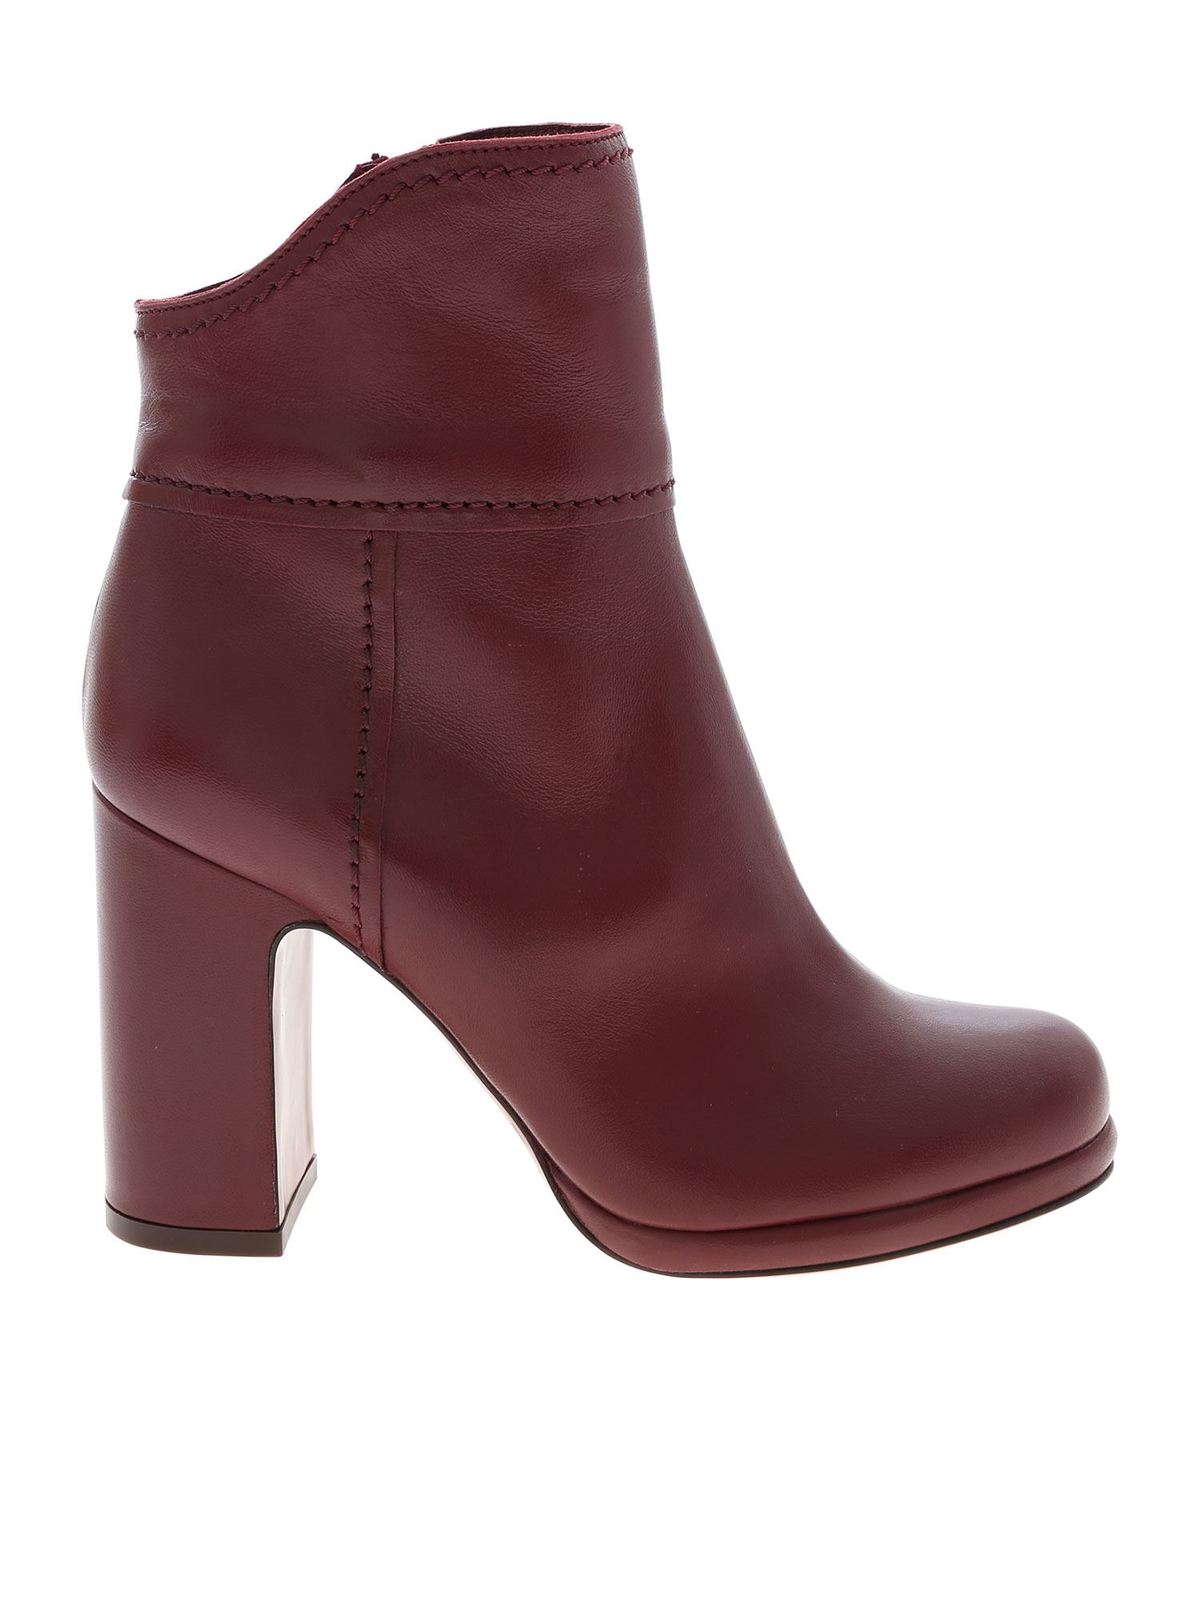 burgundy ankle boots leather